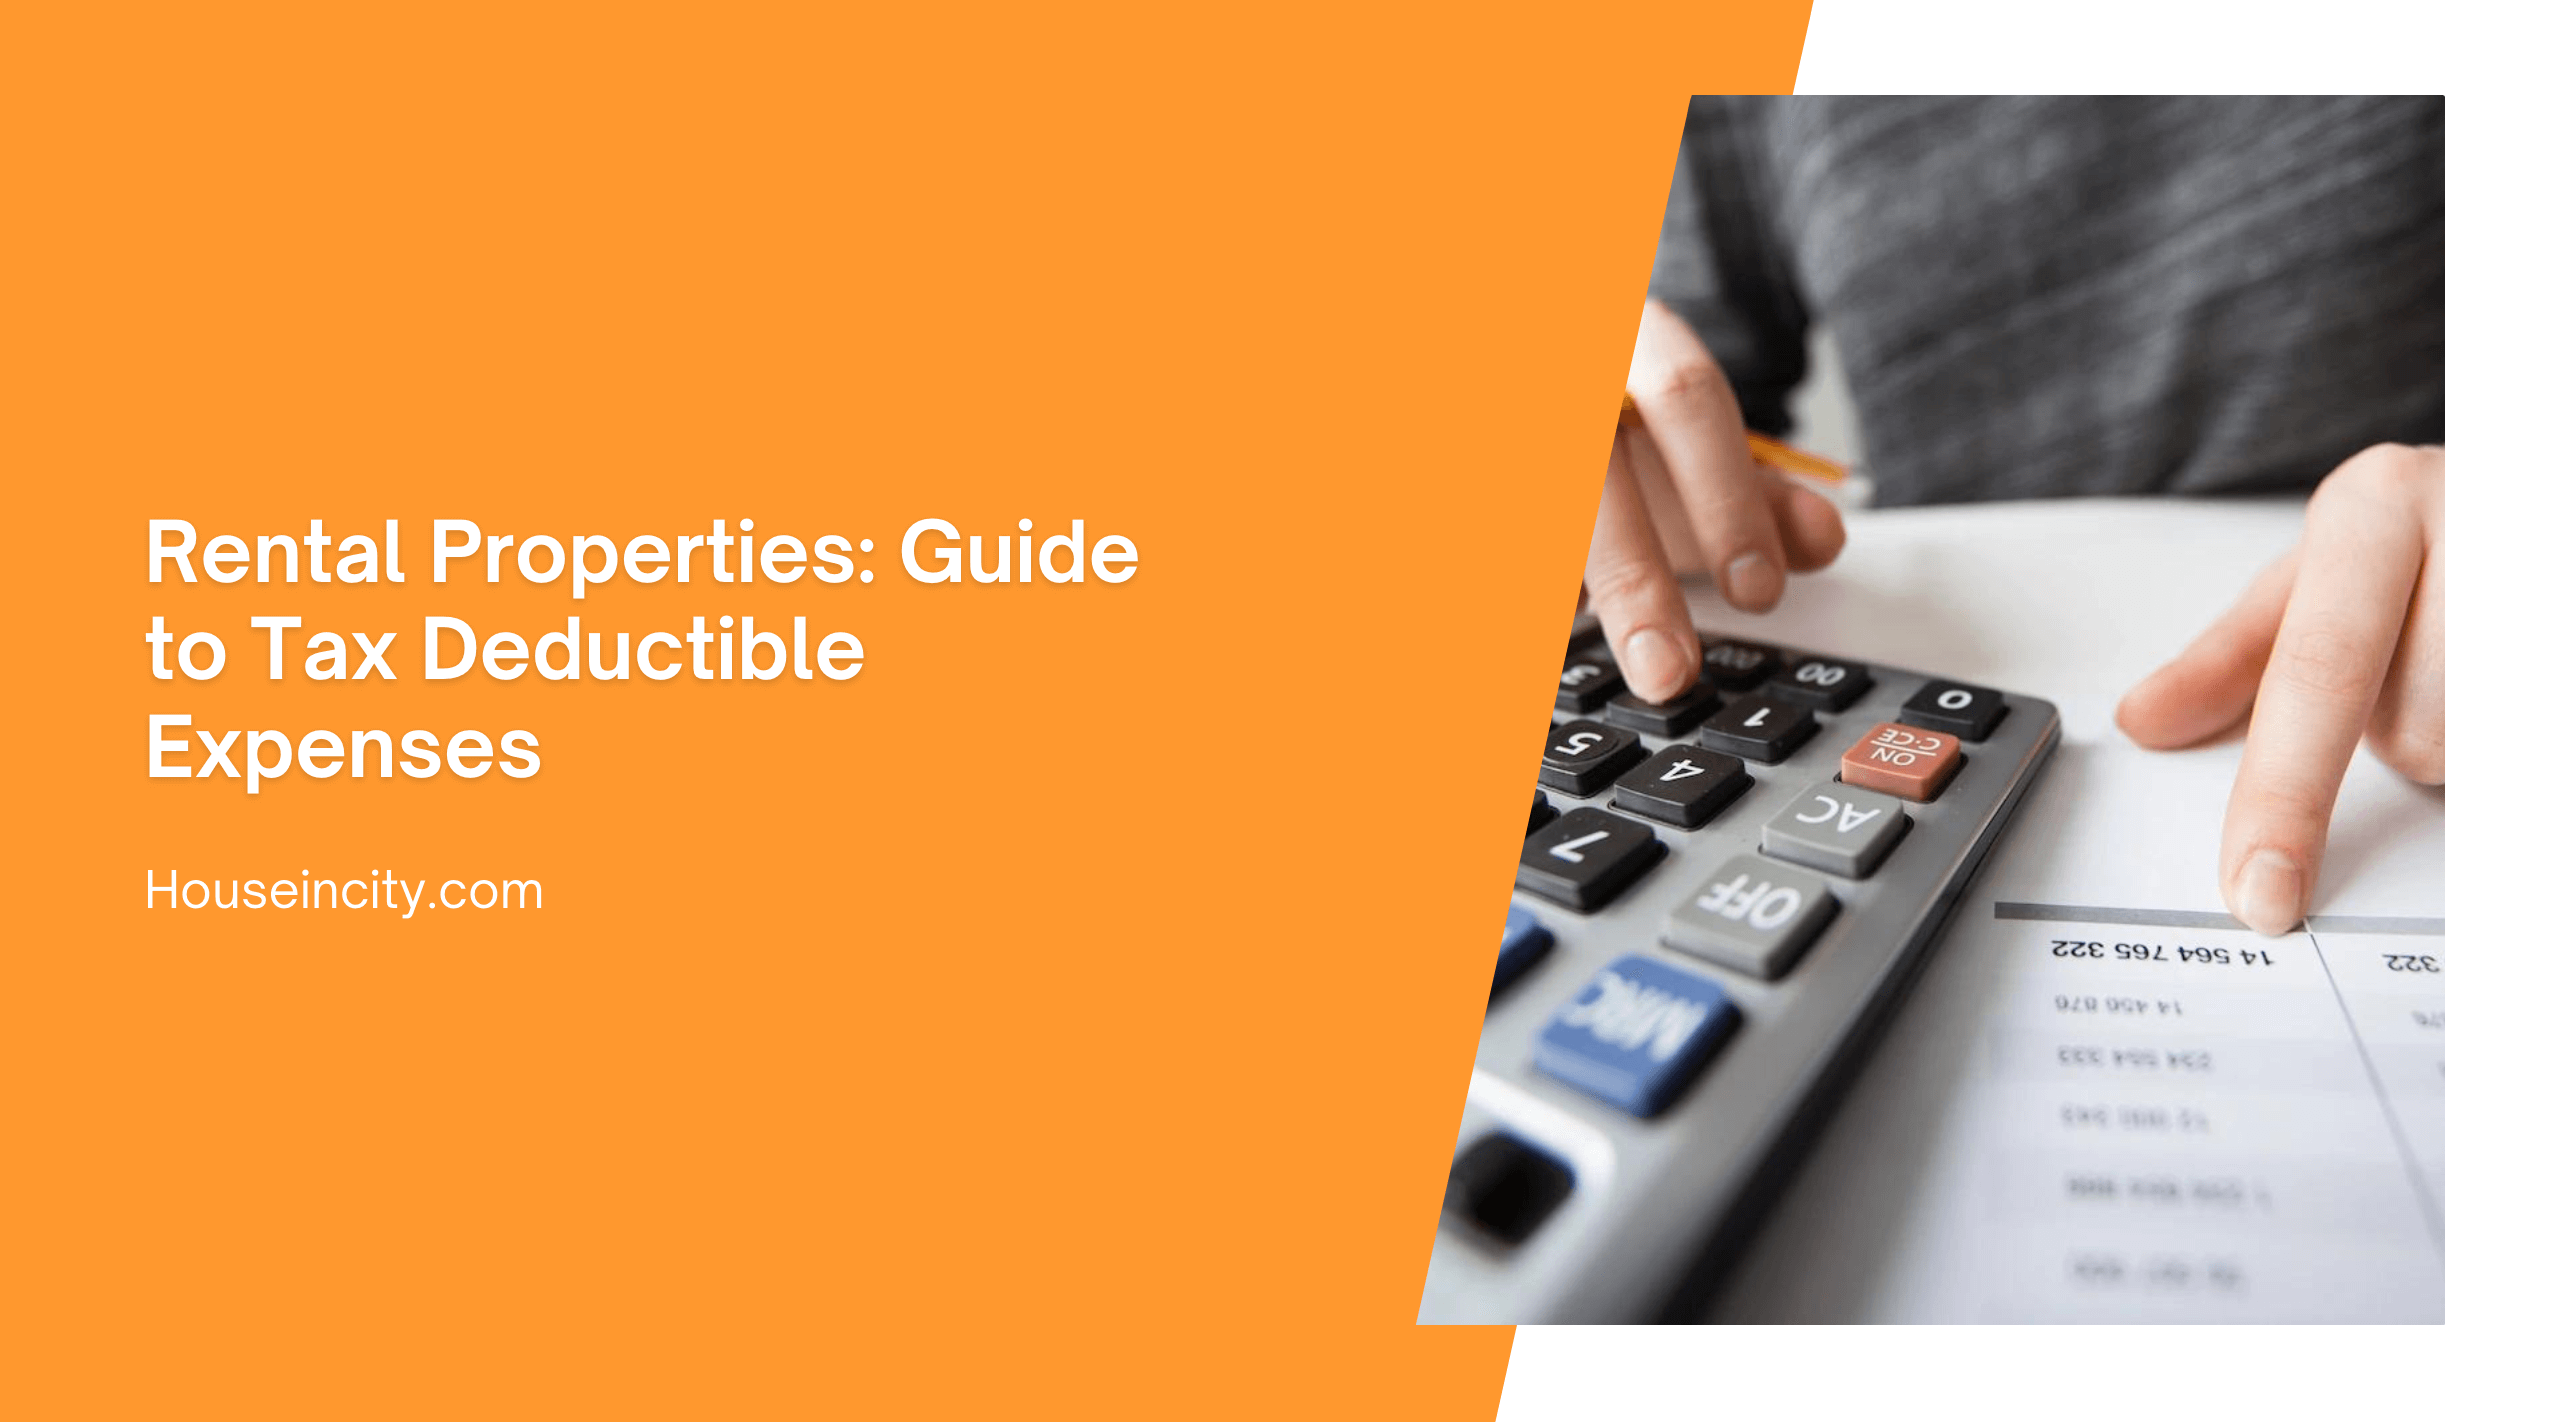 Rental Properties: Guide to Tax Deductible Expenses